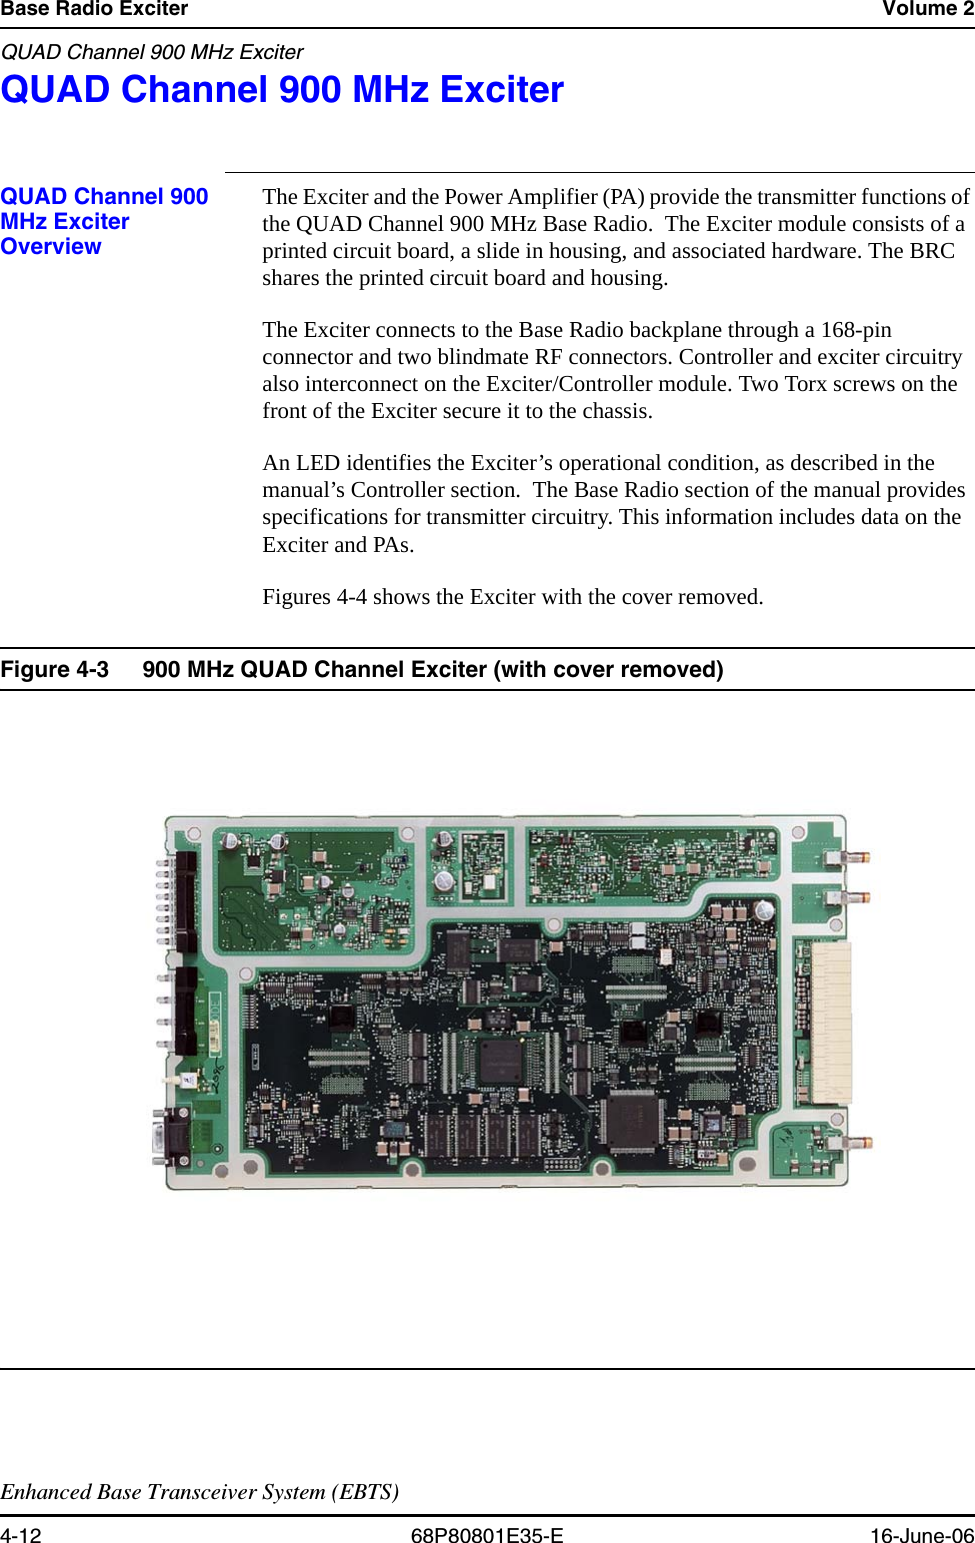 Base Radio Exciter Volume 2QUAD Channel 900 MHz ExciterEnhanced Base Transceiver System (EBTS)4-12 68P80801E35-E 16-June-06QUAD Channel 900 MHz Exciter  4QUAD Channel 900 MHz Exciter OverviewThe Exciter and the Power Amplifier (PA) provide the transmitter functions of the QUAD Channel 900 MHz Base Radio.  The Exciter module consists of a printed circuit board, a slide in housing, and associated hardware. The BRC shares the printed circuit board and housing.The Exciter connects to the Base Radio backplane through a 168-pin connector and two blindmate RF connectors. Controller and exciter circuitry also interconnect on the Exciter/Controller module. Two Torx screws on the front of the Exciter secure it to the chassis. An LED identifies the Exciter’s operational condition, as described in the manual’s Controller section.  The Base Radio section of the manual provides specifications for transmitter circuitry. This information includes data on the Exciter and PAs.Figures 4-4 shows the Exciter with the cover removed.Figure 4-3 900 MHz QUAD Channel Exciter (with cover removed) 